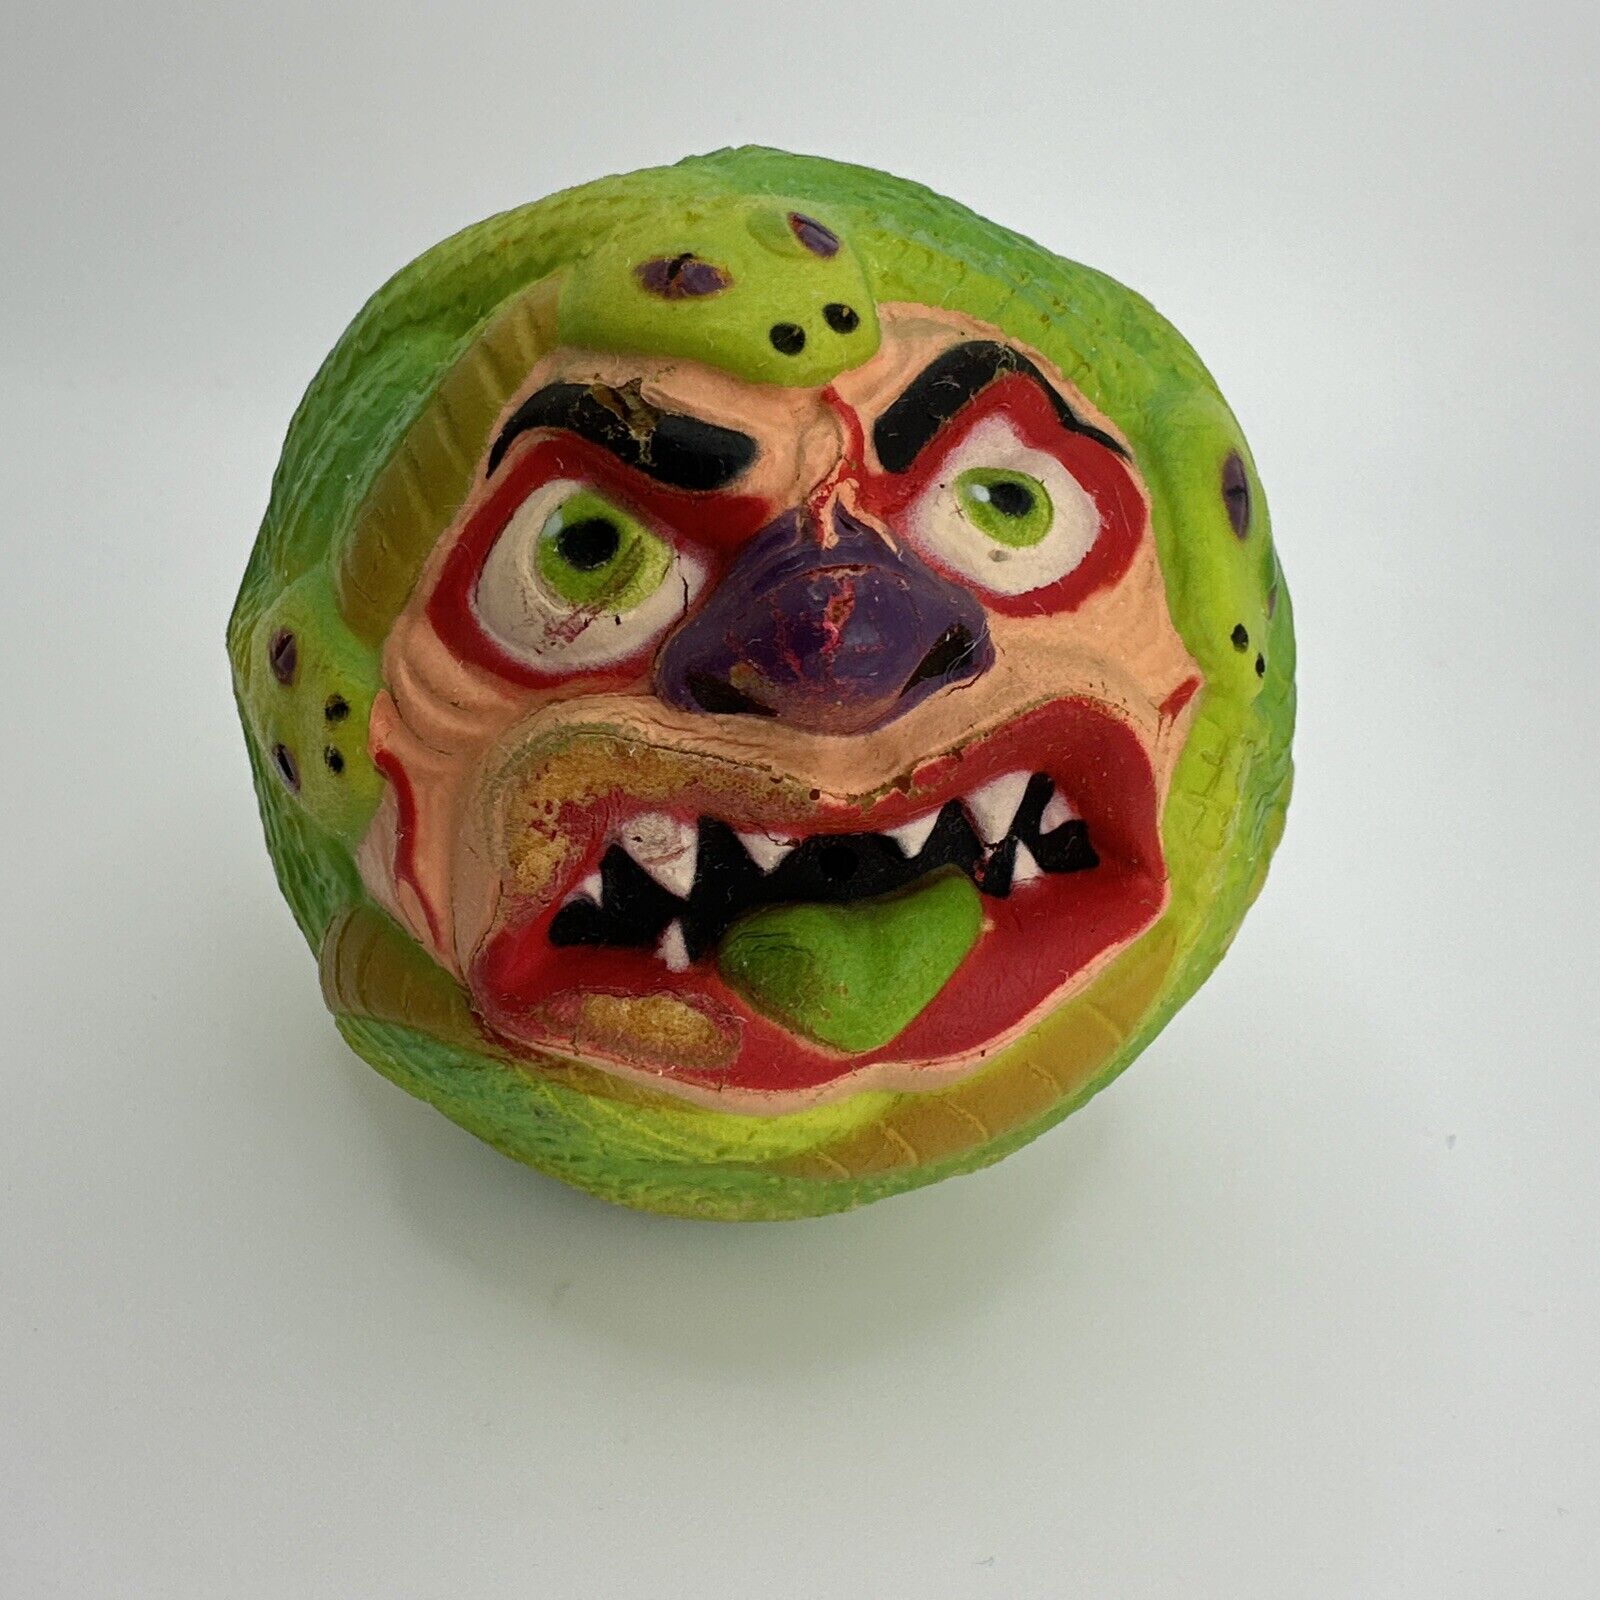 Vintage 1986 Amtoy Snake Bait Madballs Toy Made In Taiwan Series 2 Mad Balls